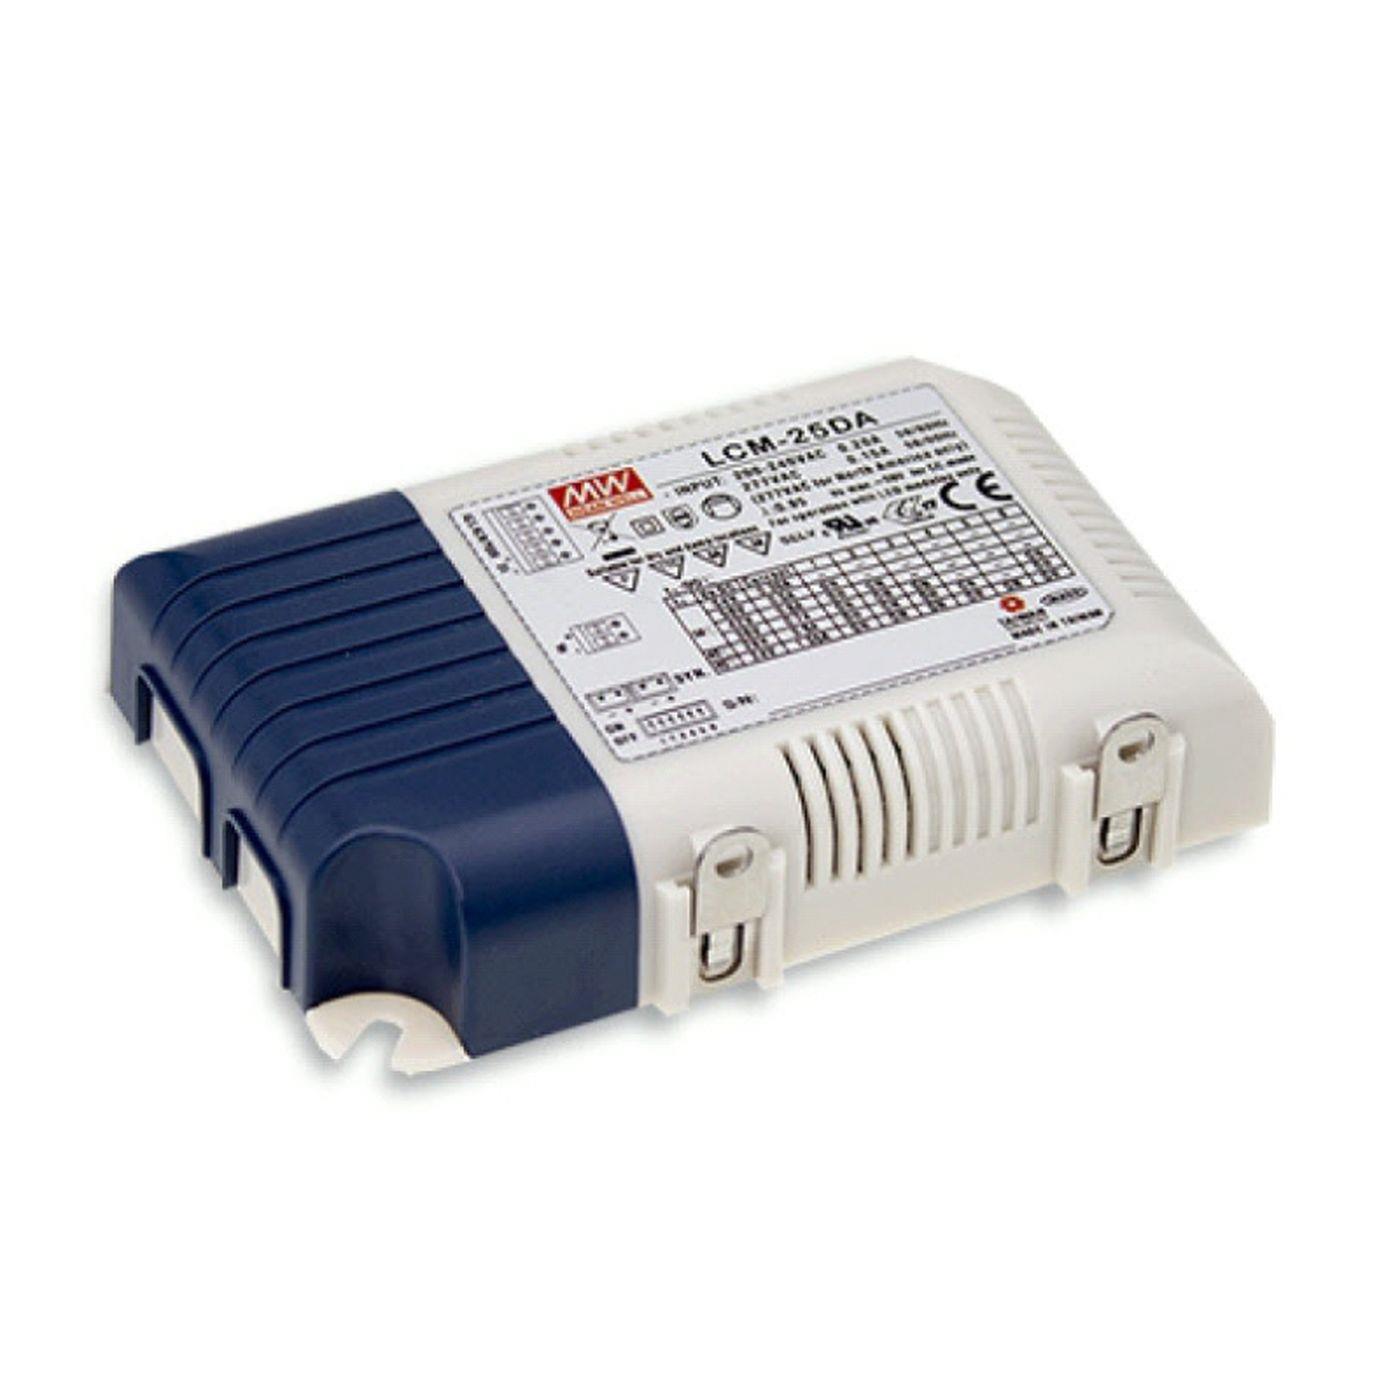 LCM-25DA 25W Dali Dimmable Constant current LED power supply Driver Transformer 350 500 600 700 900 1050 1400mA